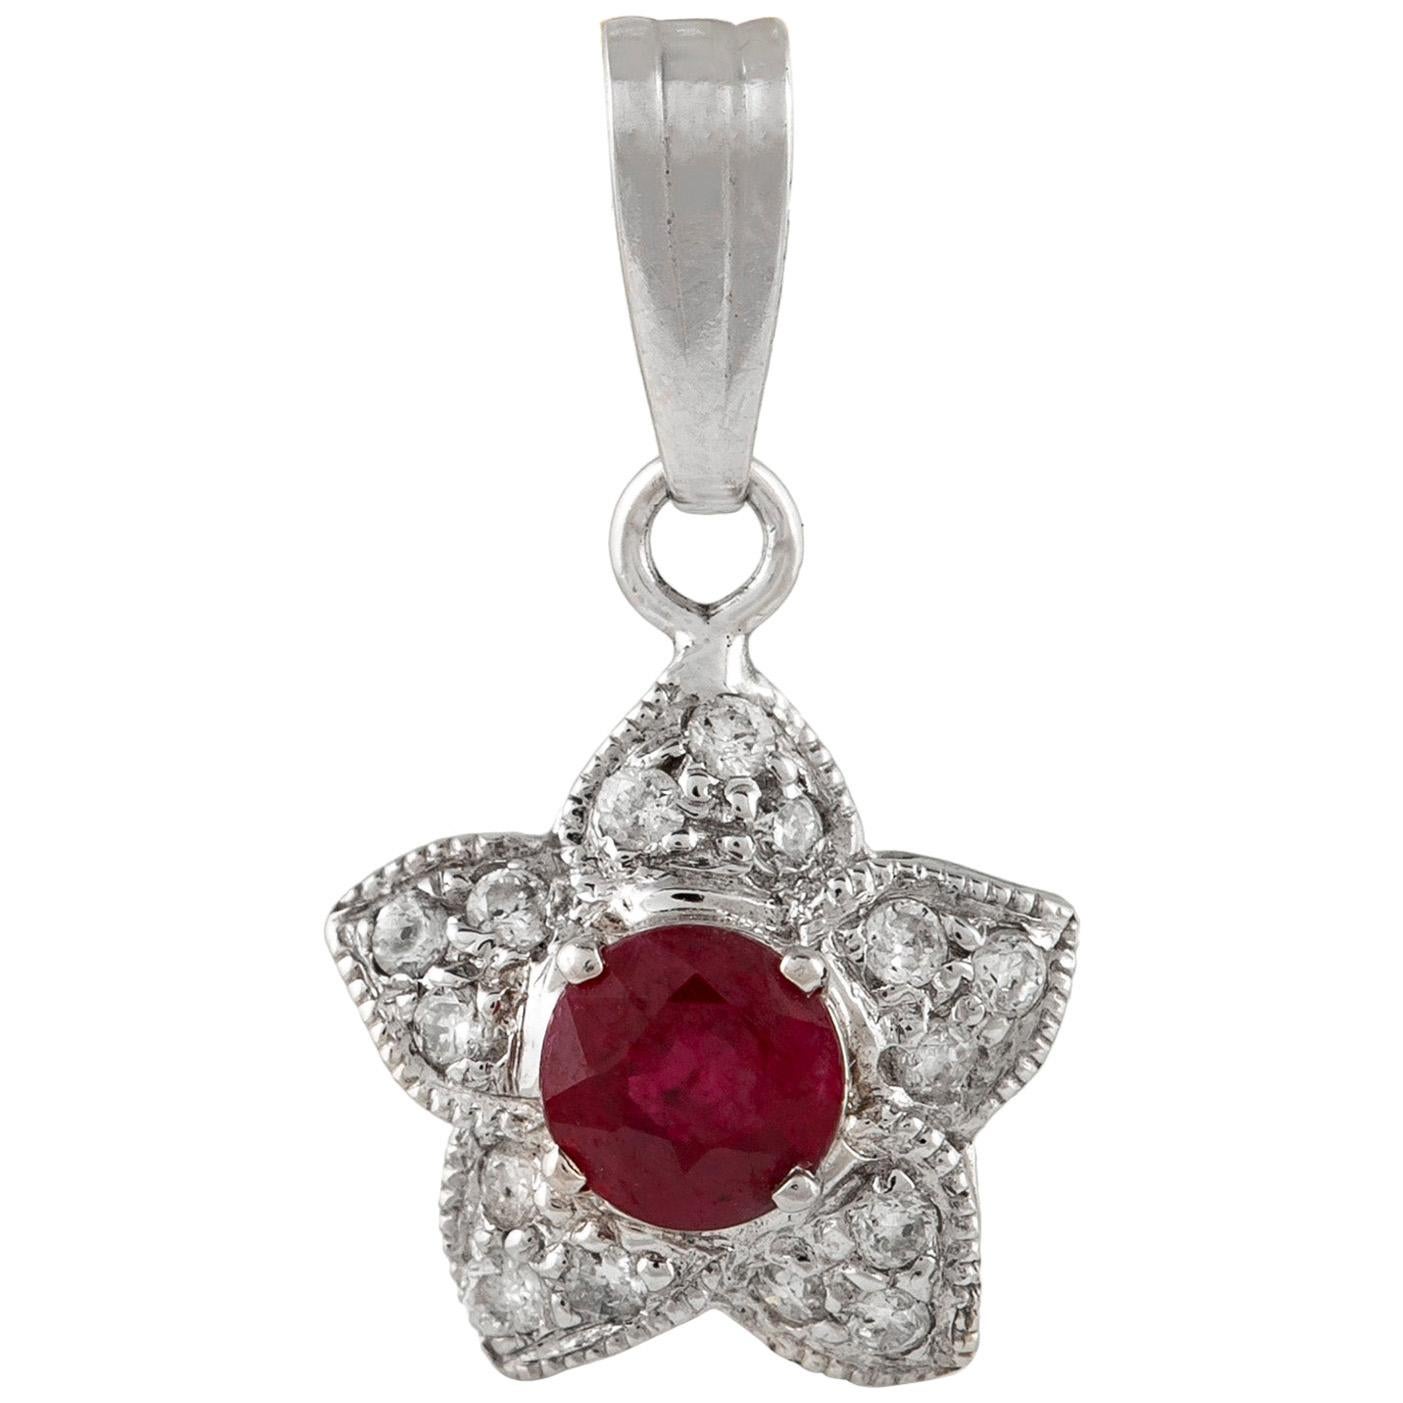 18 Karat White Gold Star with Center Ruby and Diamonds Pendant